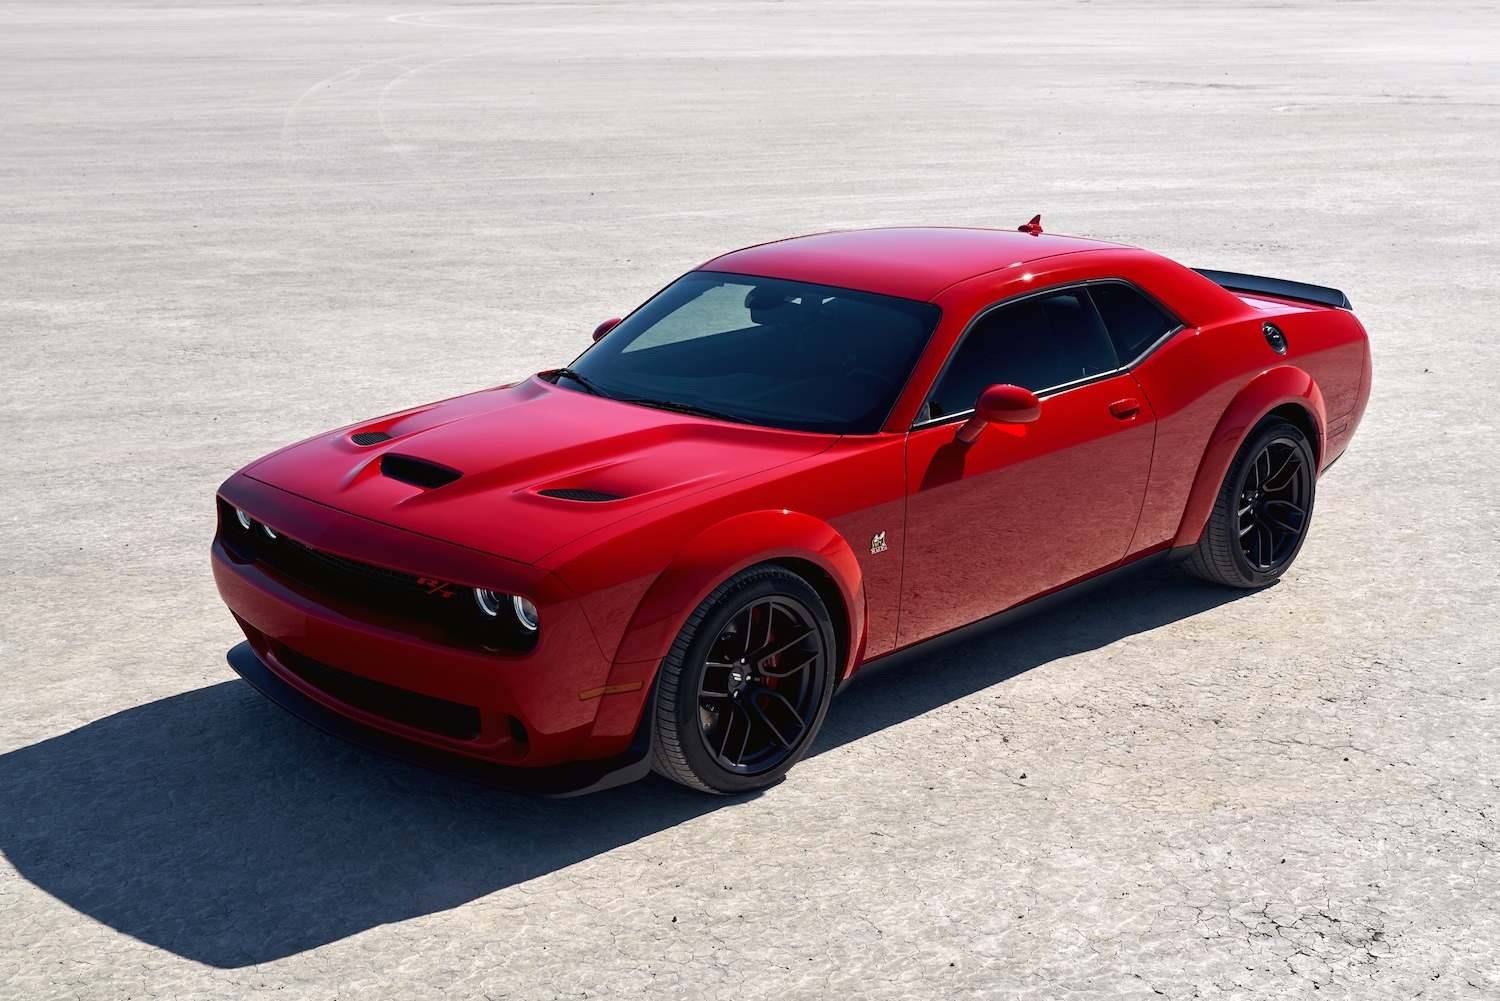 Red muscle car. With 11 inch wide tires, the 2022 Dodge Challenger Scat Pack widebody is an obvious performance upgrade |  Stellantis